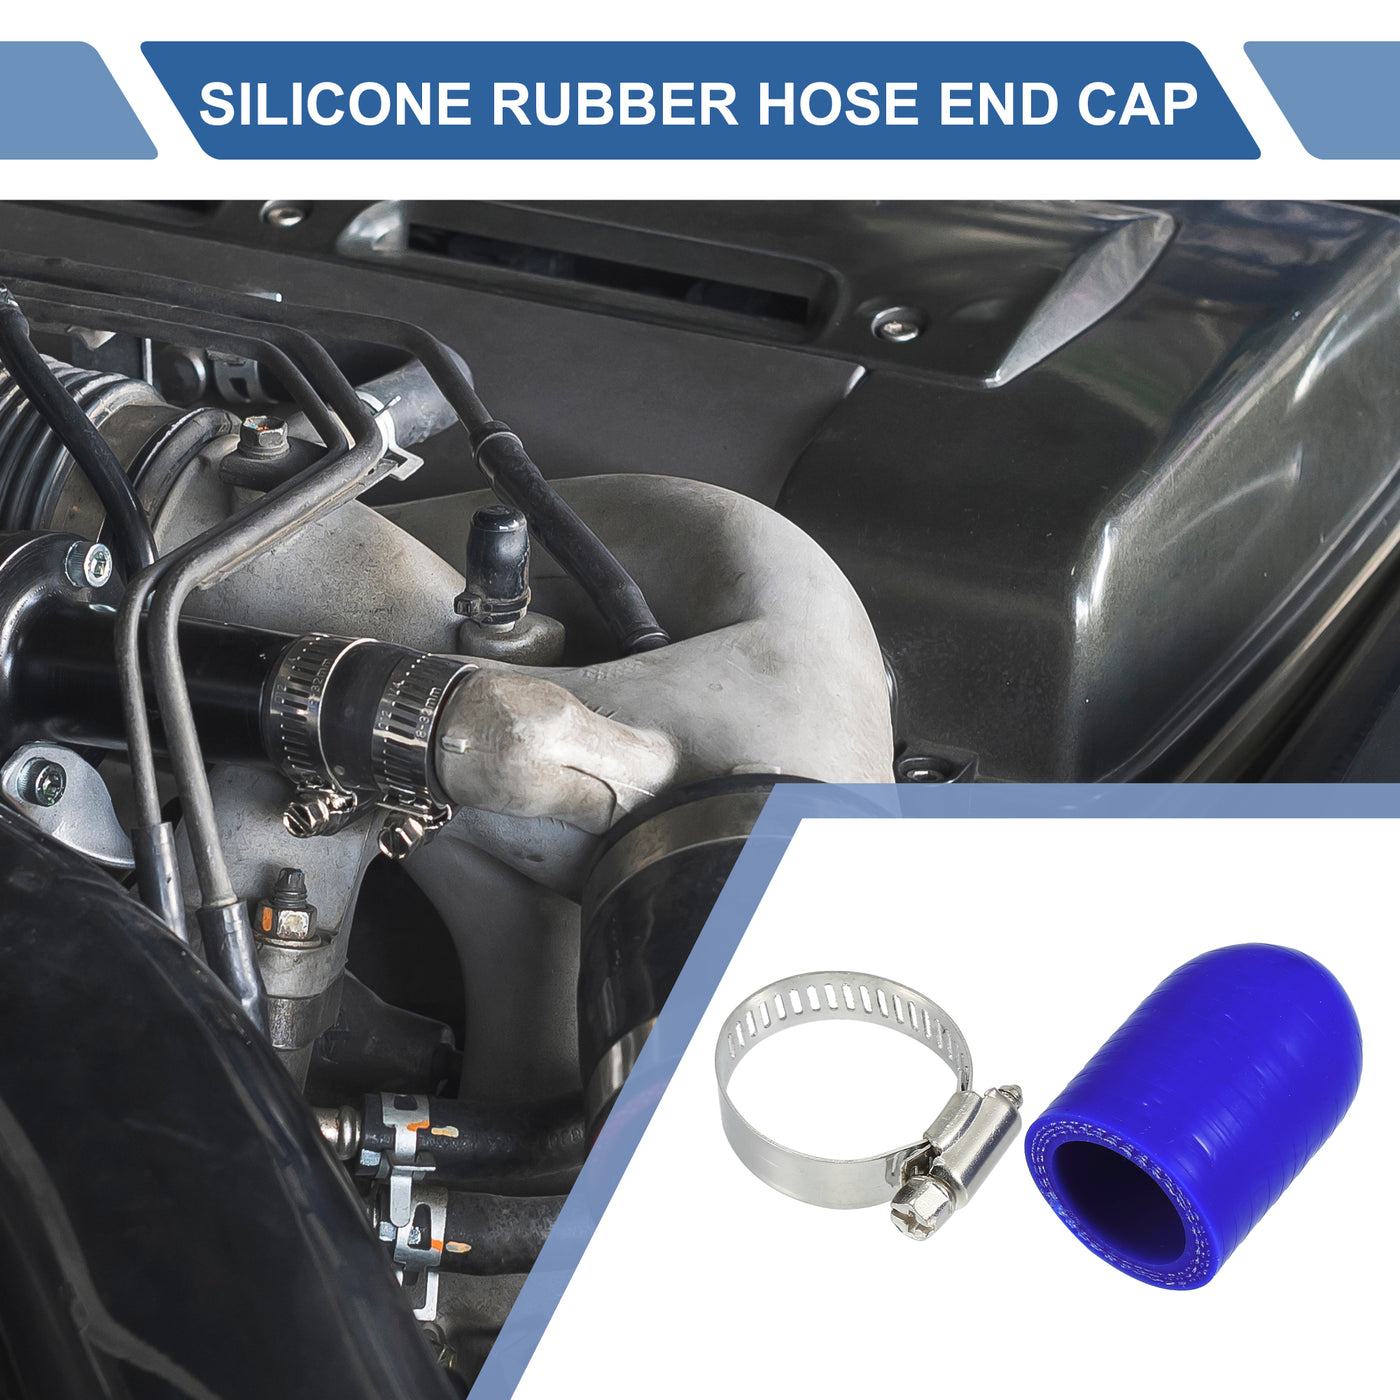 X AUTOHAUX 1 Set 30mm Length 22mm/0.87" ID Blue Car Silicone Rubber Hose End Cap with Clamps Silicone Reinforced Blanking Cap for Bypass Tube Universal